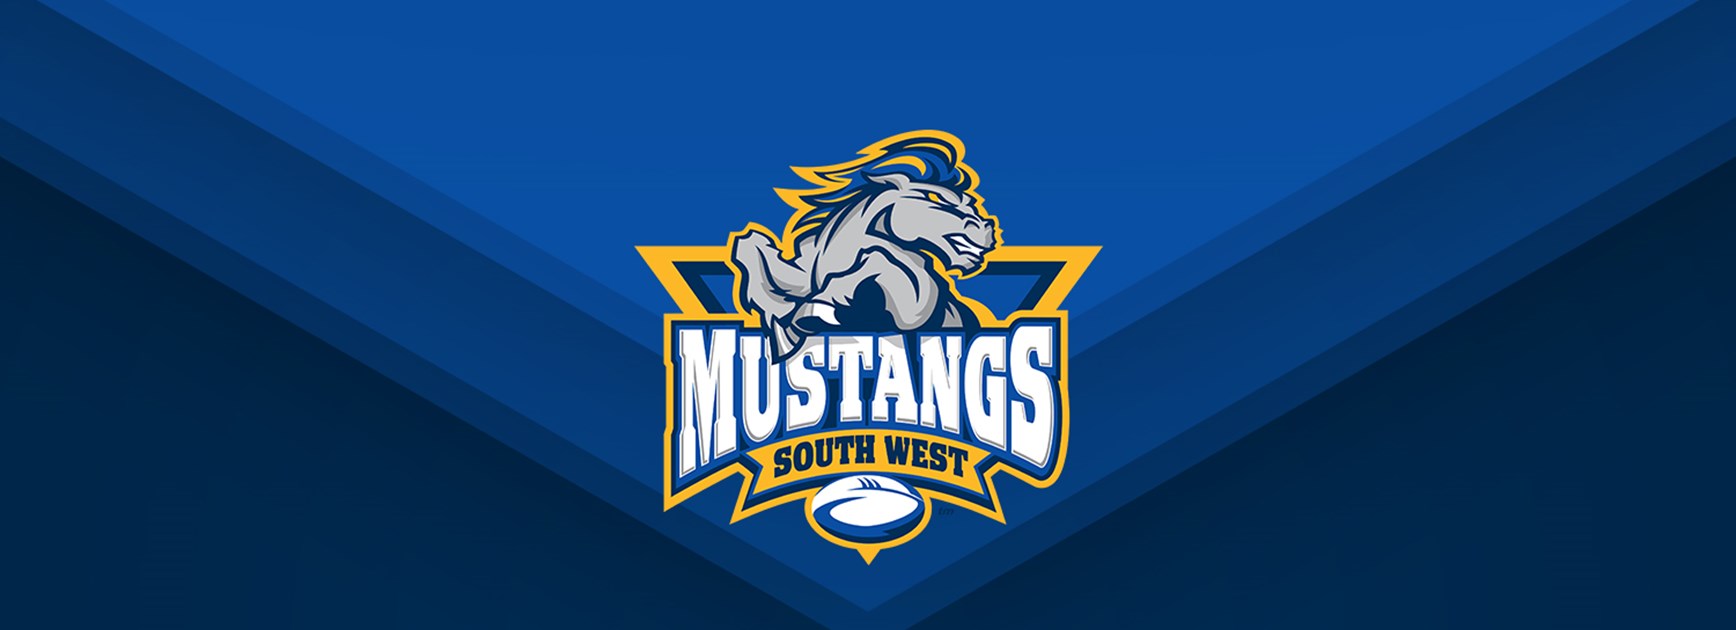 South West prepare for Mustangs trials